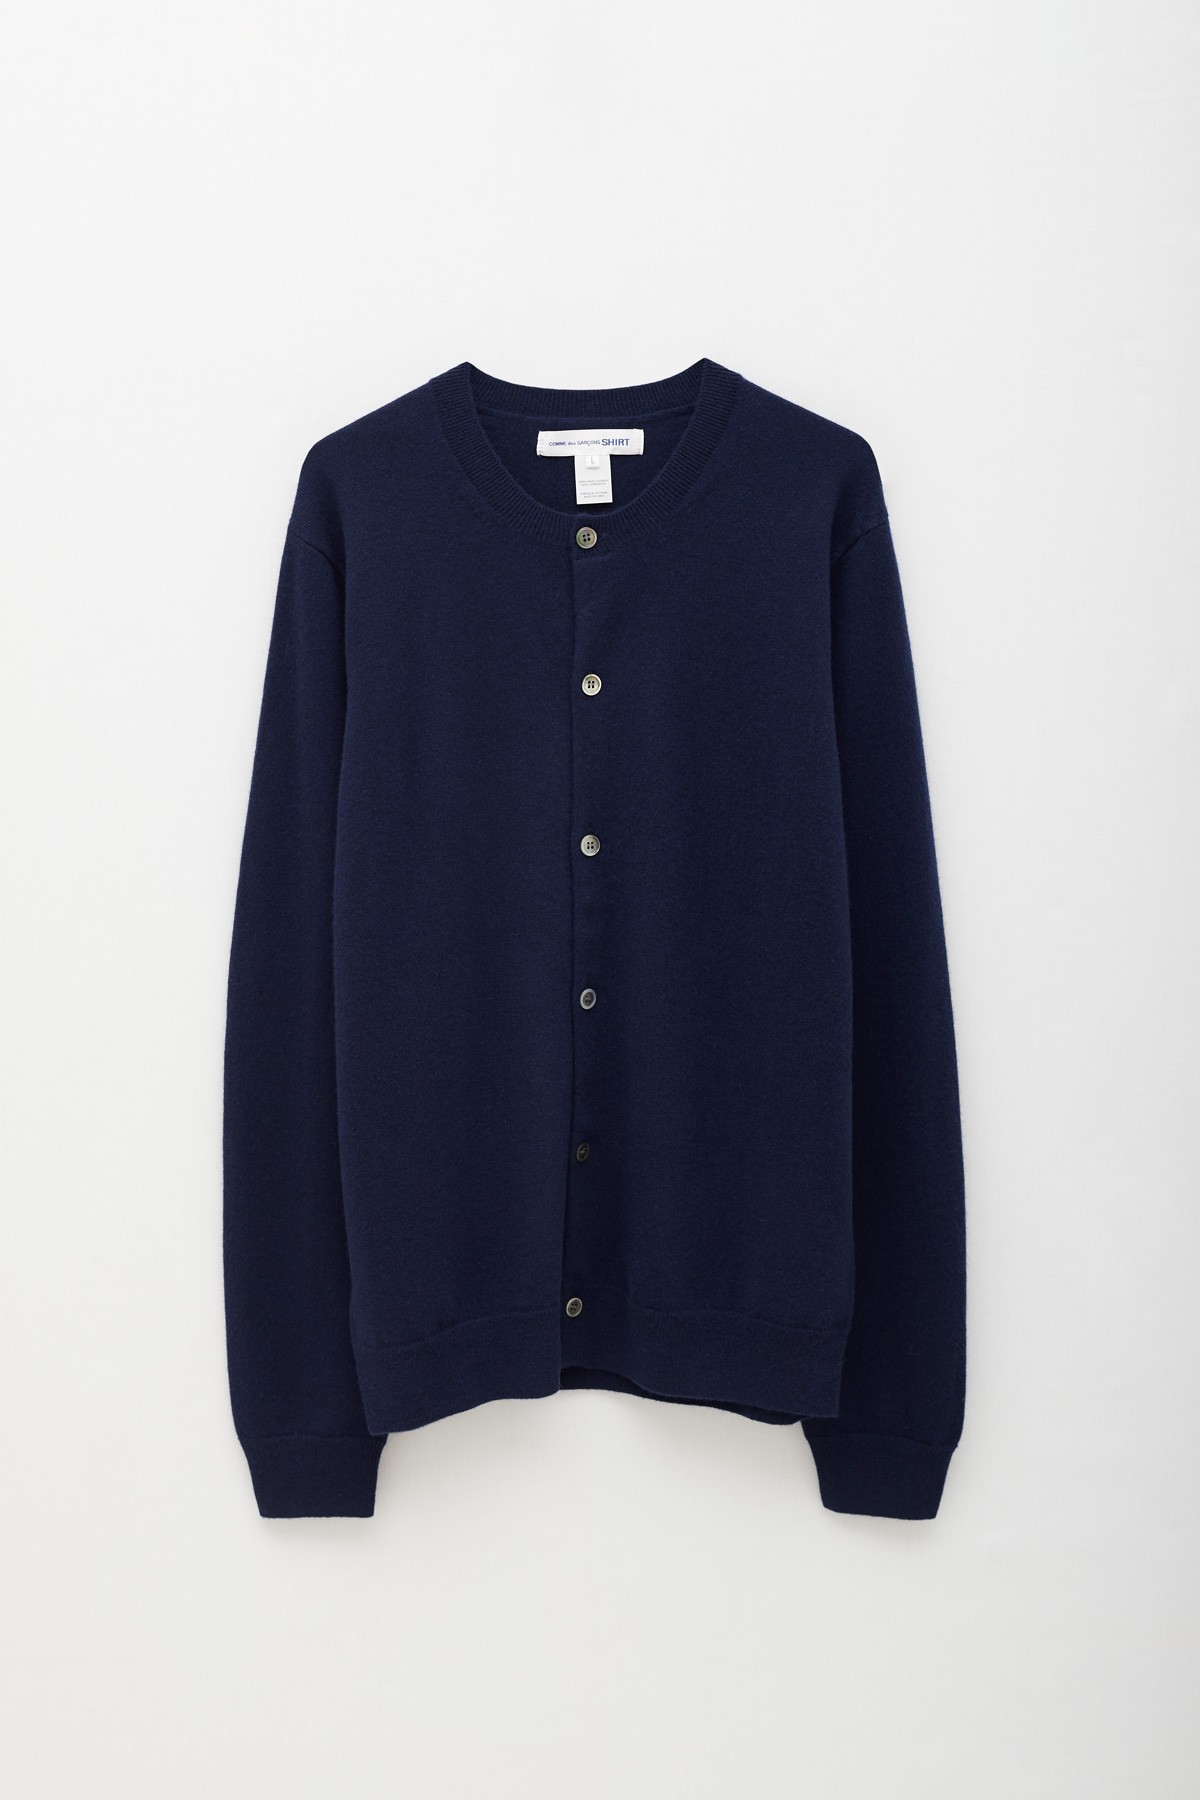 COMME DES GARCONS SHIRT FOREVER NAVY ROUND CARDIGAN IAMNUE